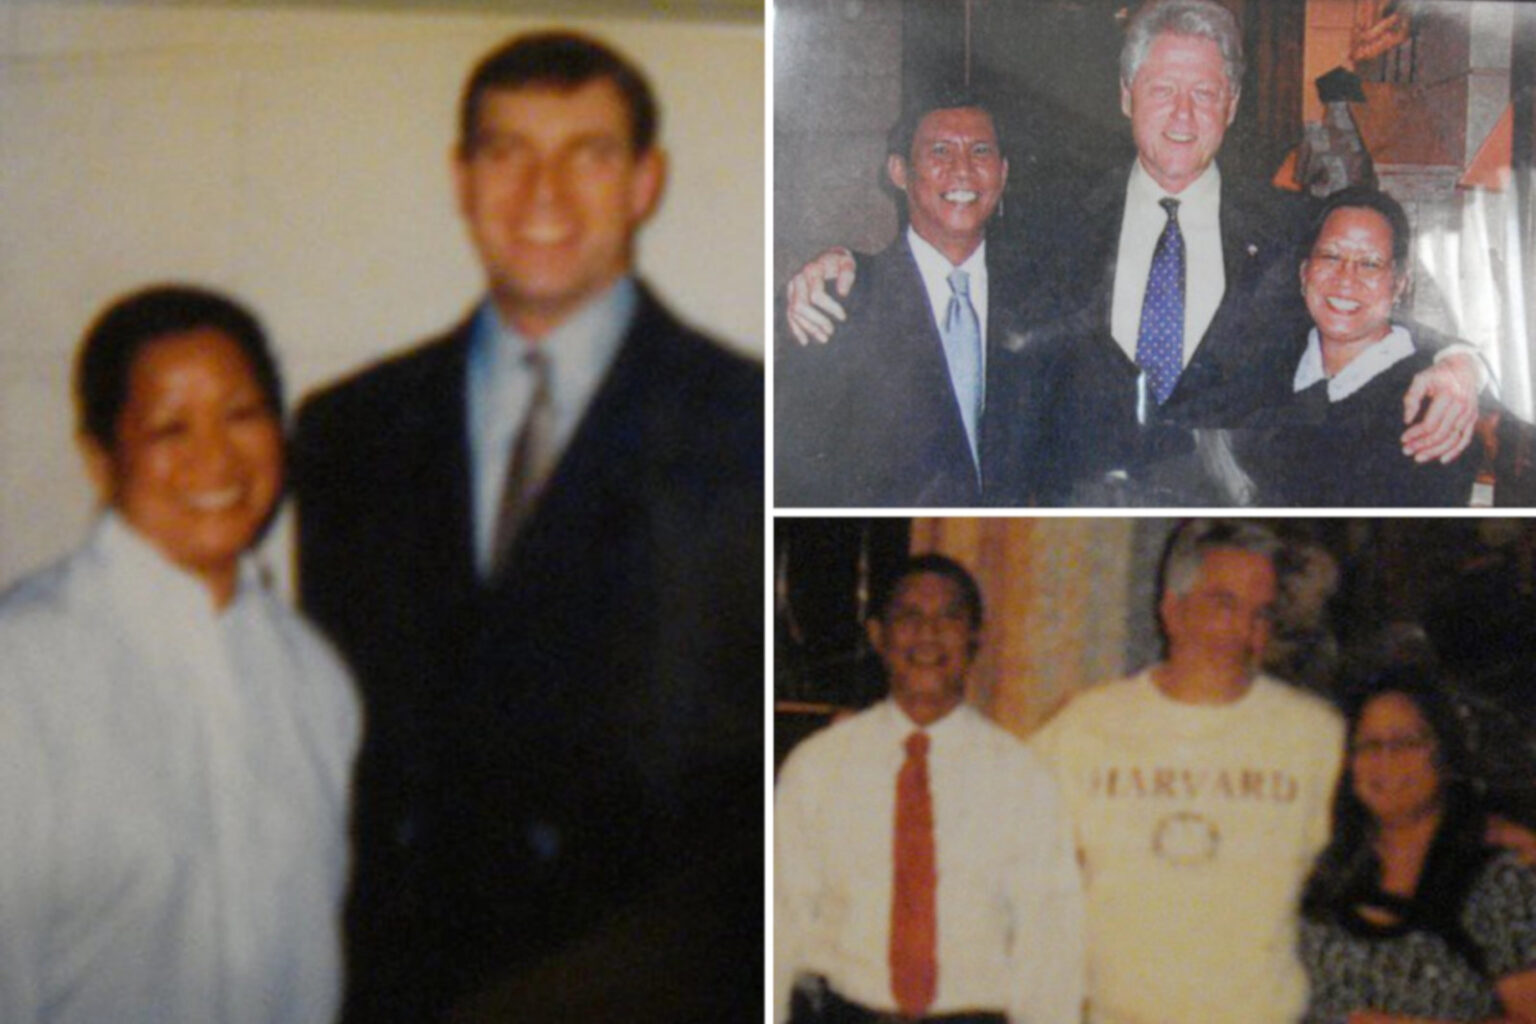 Can new photos of Jeffrey Epstein's staff with Prine Andrew, Bill Clinton, and others ruin their credibility? See new proof against Epstein's circle.